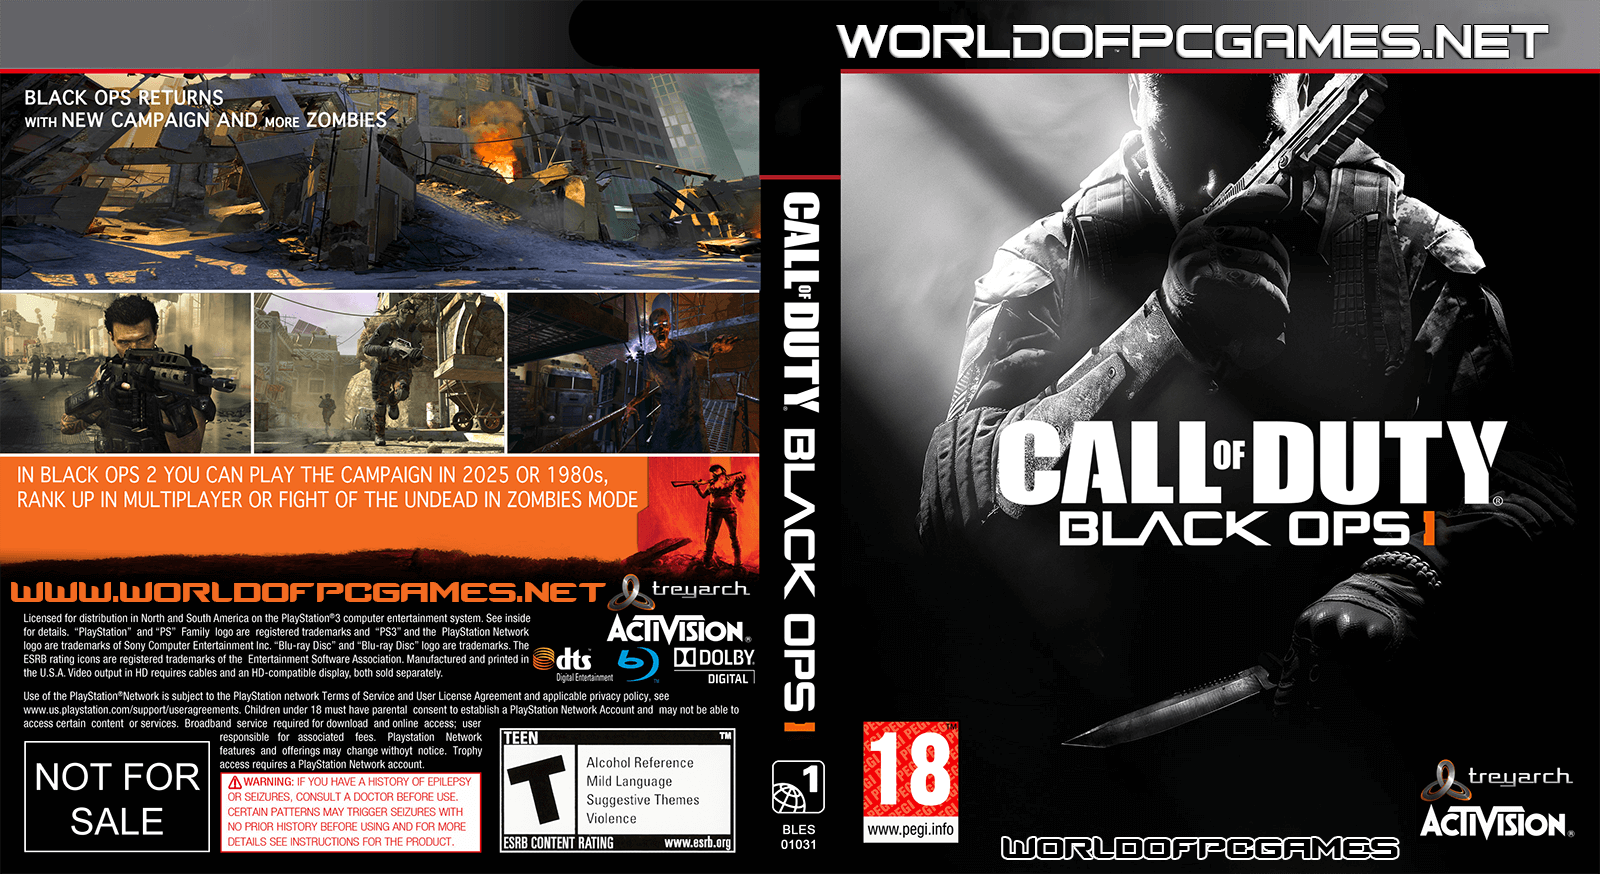 Код игры call of duty. Black ops 2 PLAYSTATION. Call of Duty Black ops 3 ps3 диск. Call of Duty Black ops II ps3 обложка. Black ops 2 ps3.